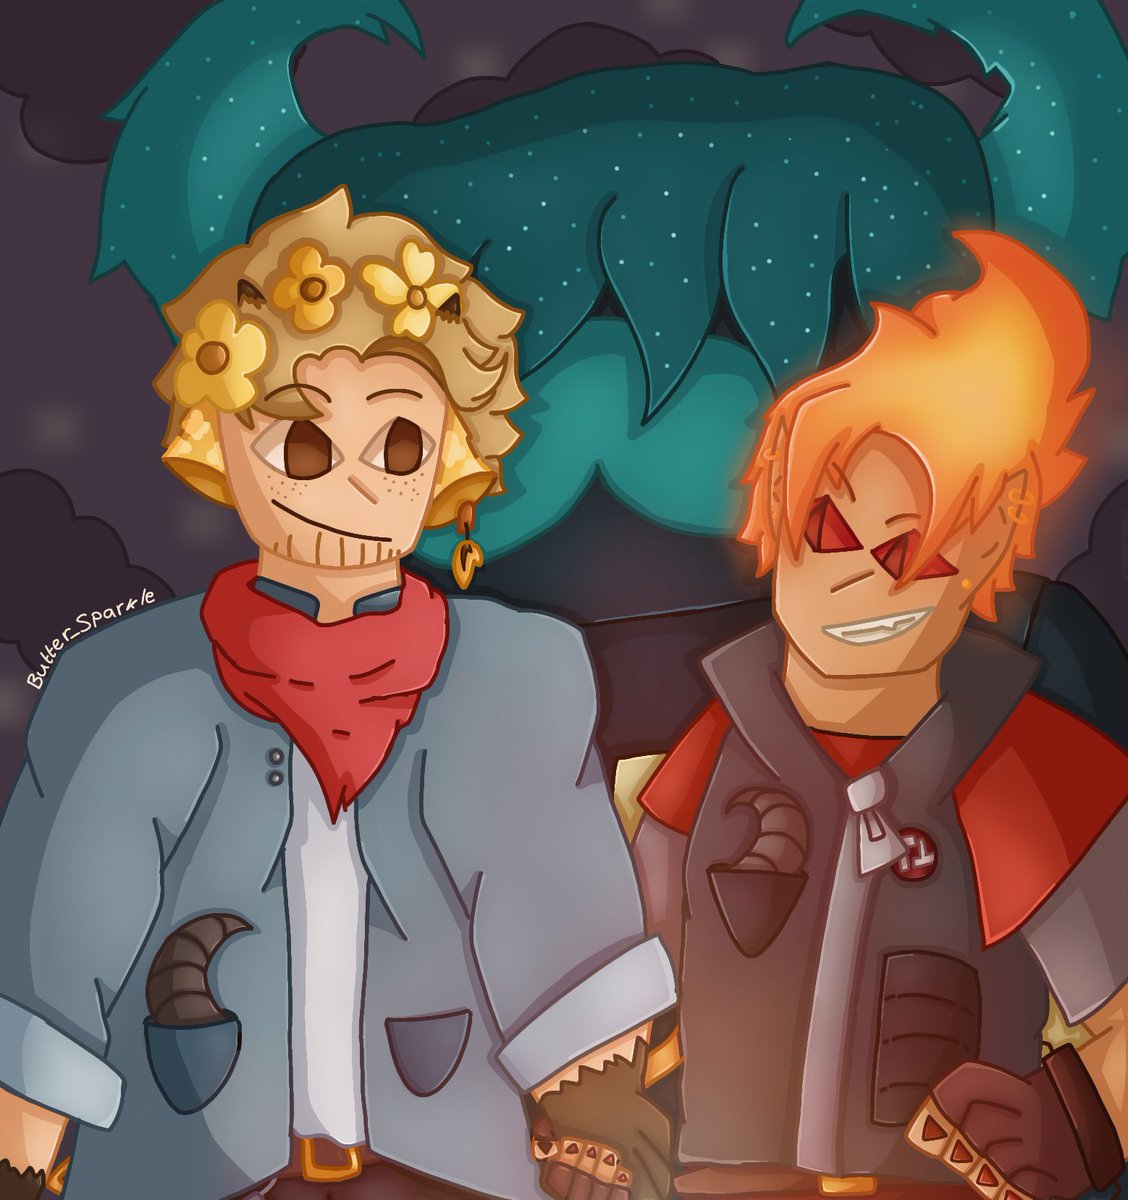 Ranchers chilling with the warden, yayy!!
So glad with how this art turned out :D
.
.
.
.
.
#solidaritygamingfanart #tangotekfanart